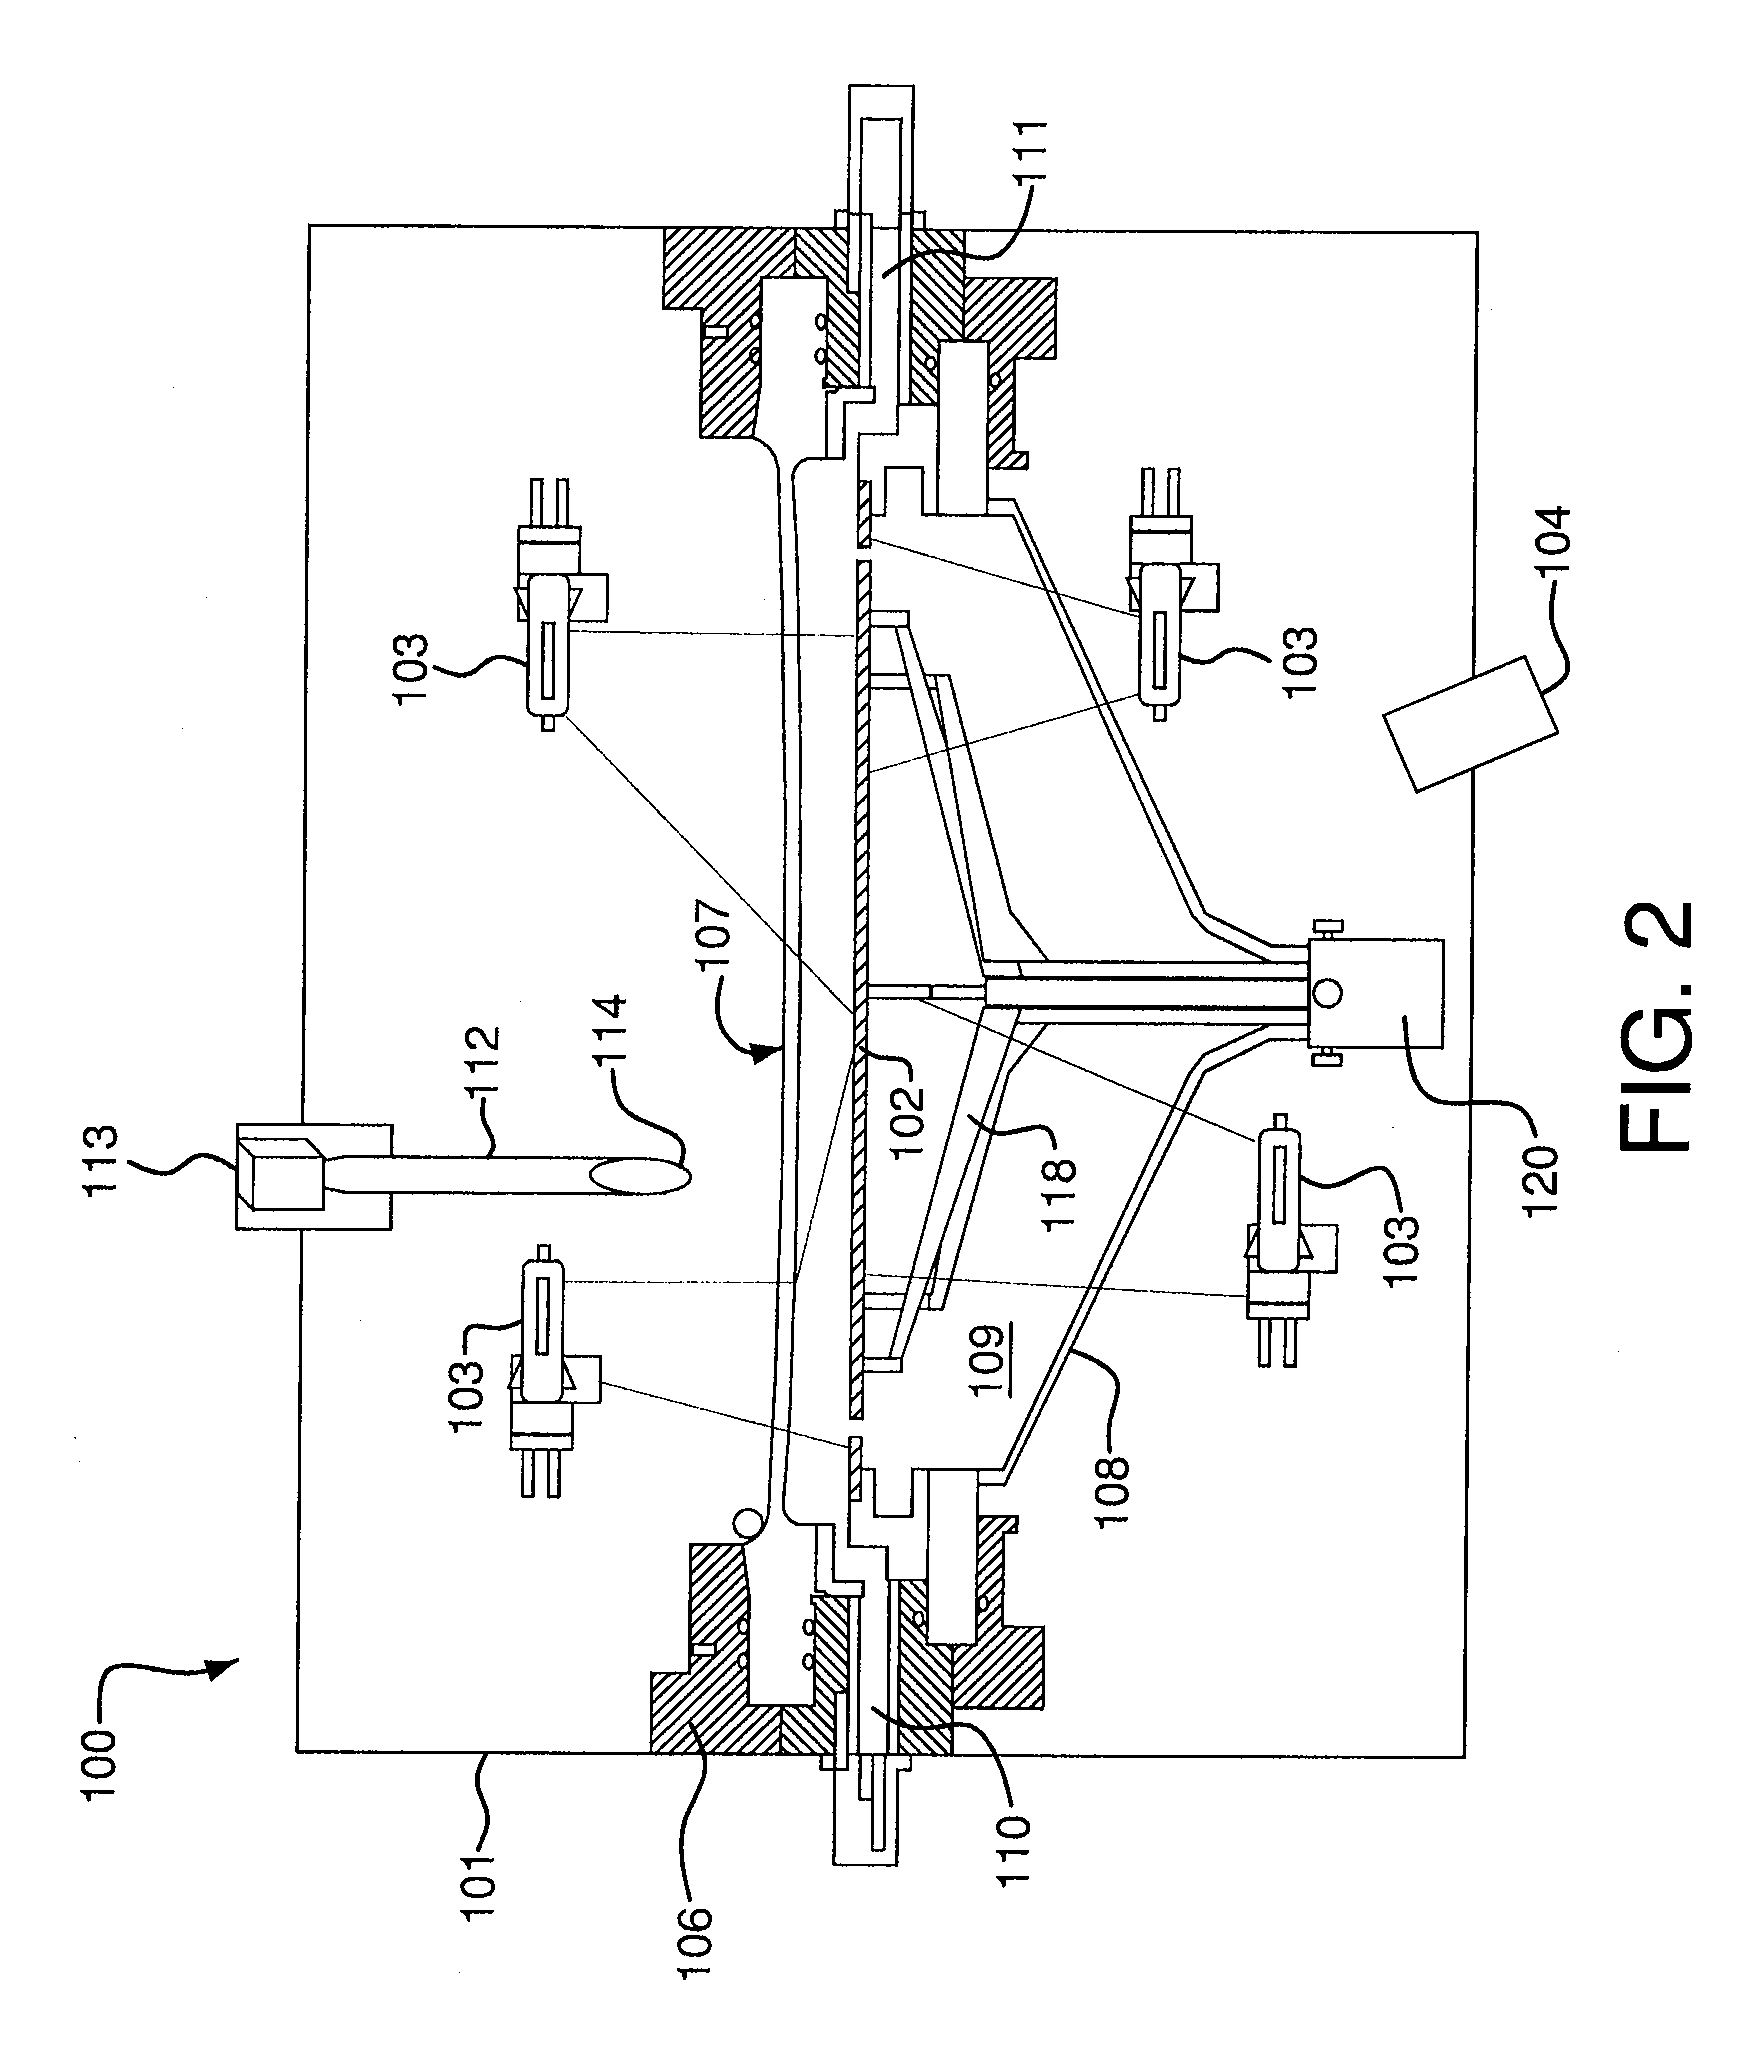 Semiconductor process chamber vision and monitoring system